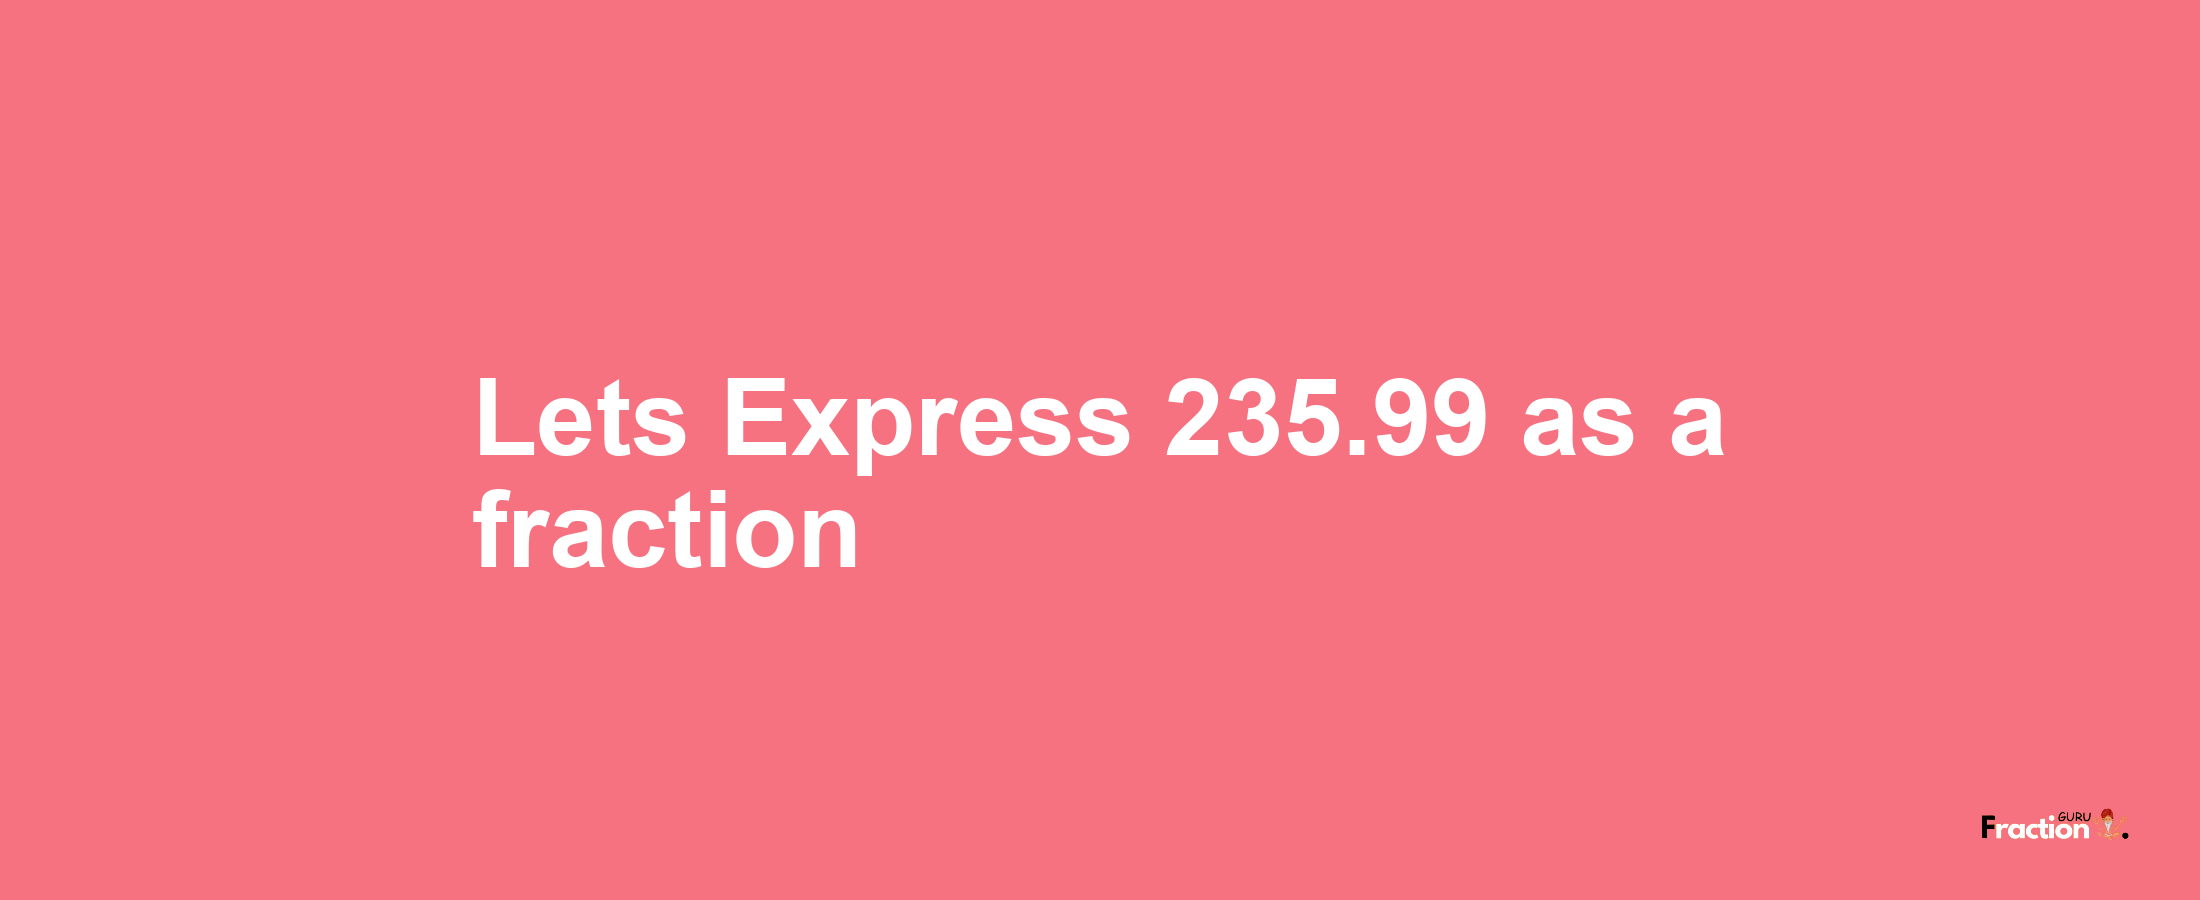 Lets Express 235.99 as afraction